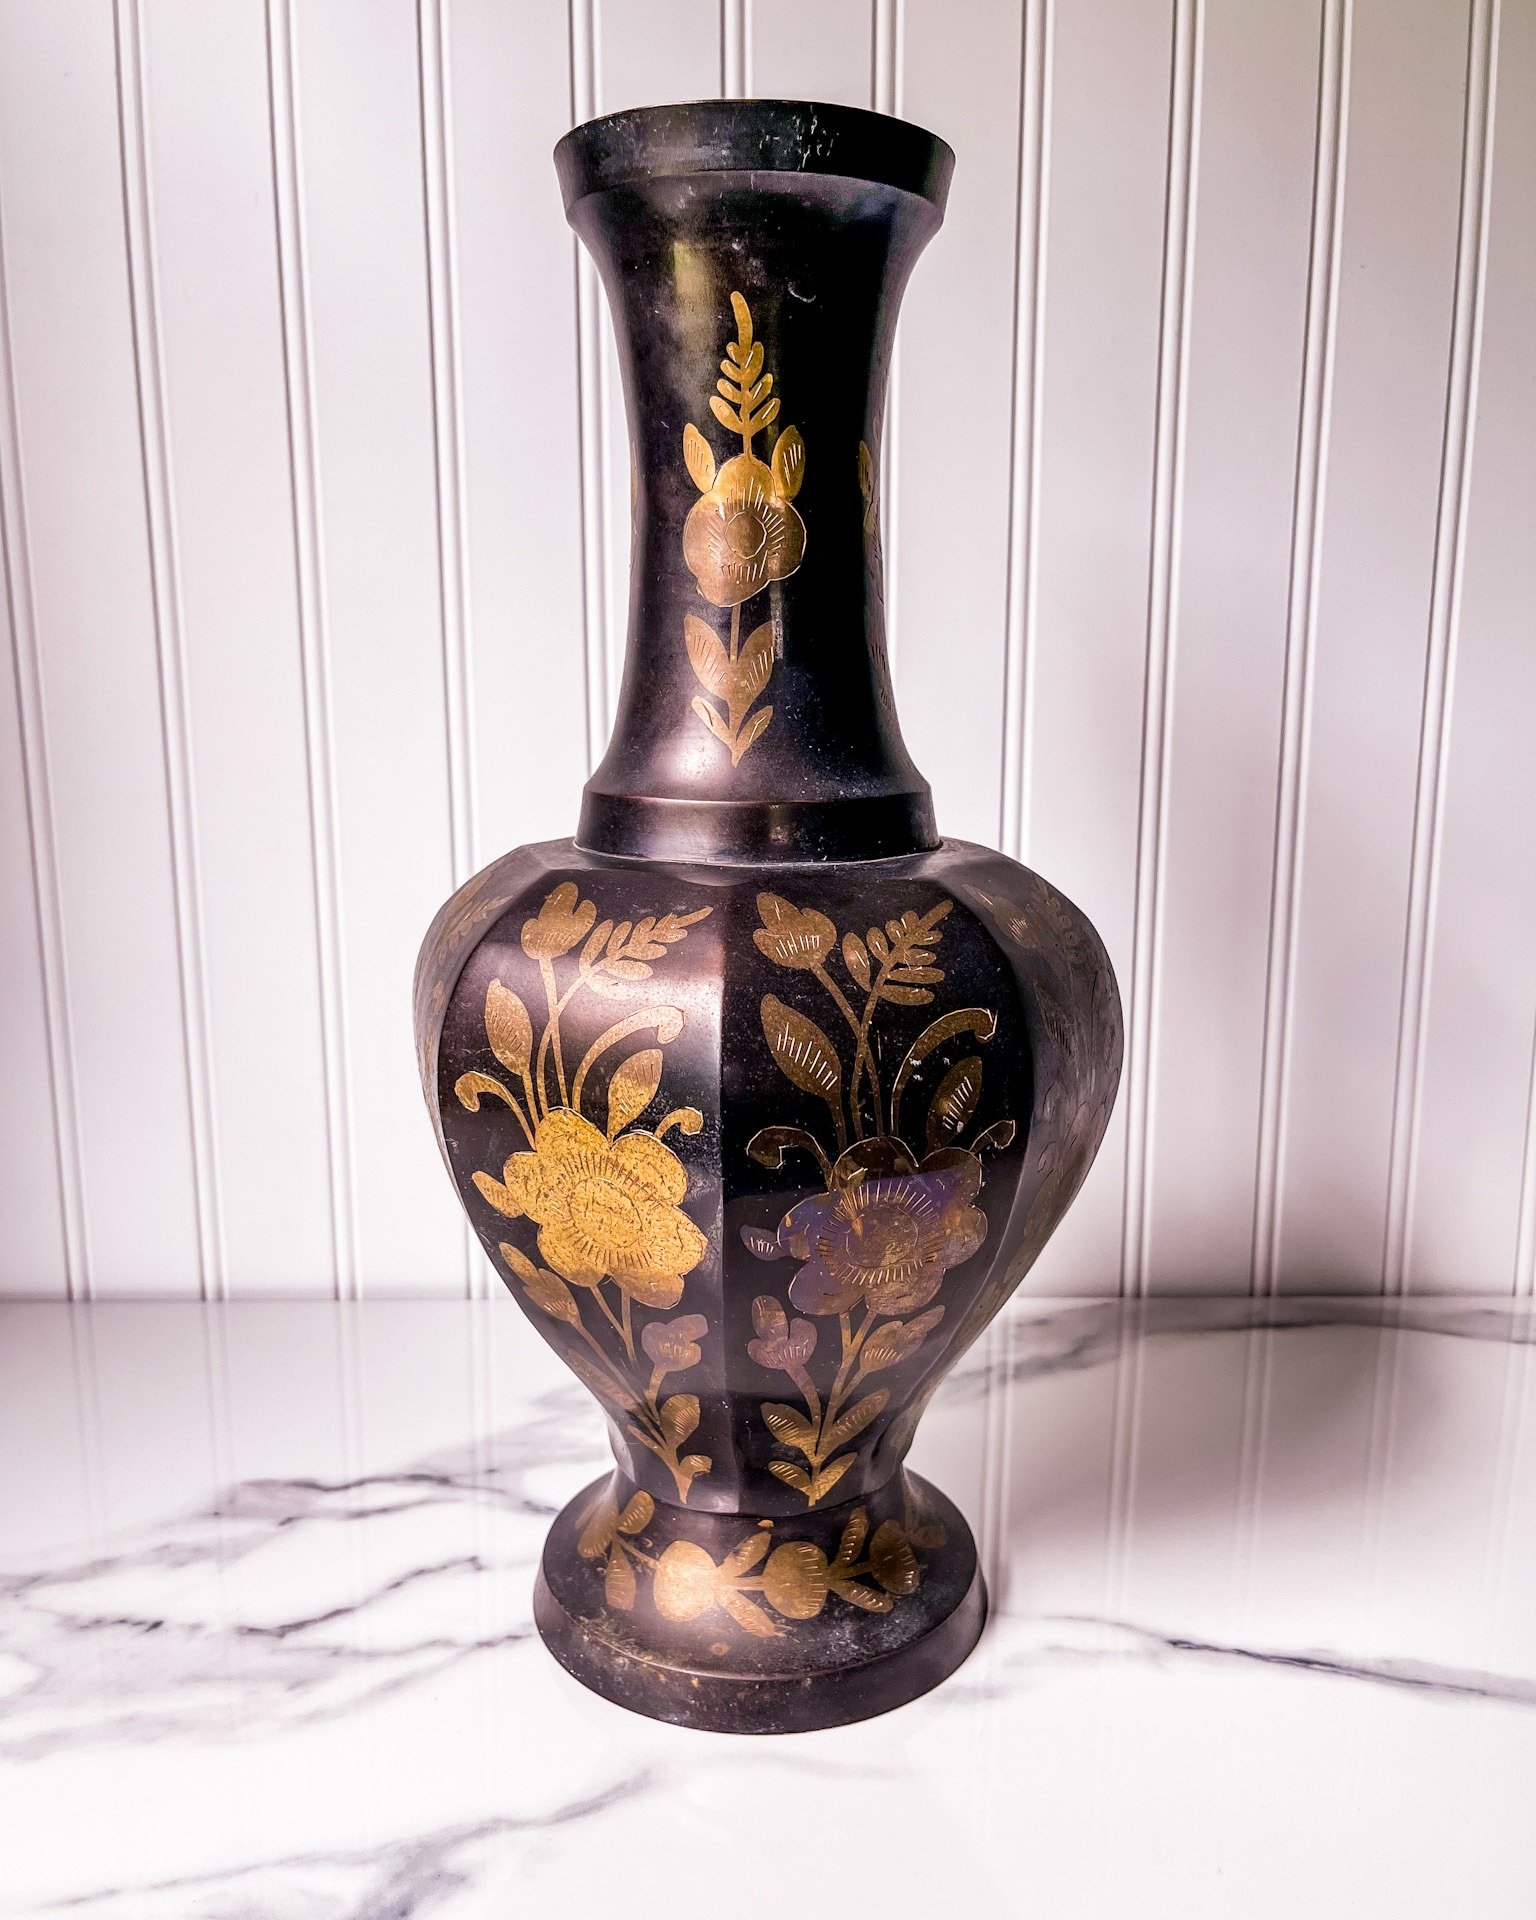 Available ✨Large Brass Floral Etched Vase. 14&quot; H x 6.5&quot; D, 3.5&quot; D opening

$68 + 📦

How to shop:
Comment &ldquo;SOLD&rdquo; on an item and DM me the post with the item you purchased, along with your Venmo name and shipping address. Co